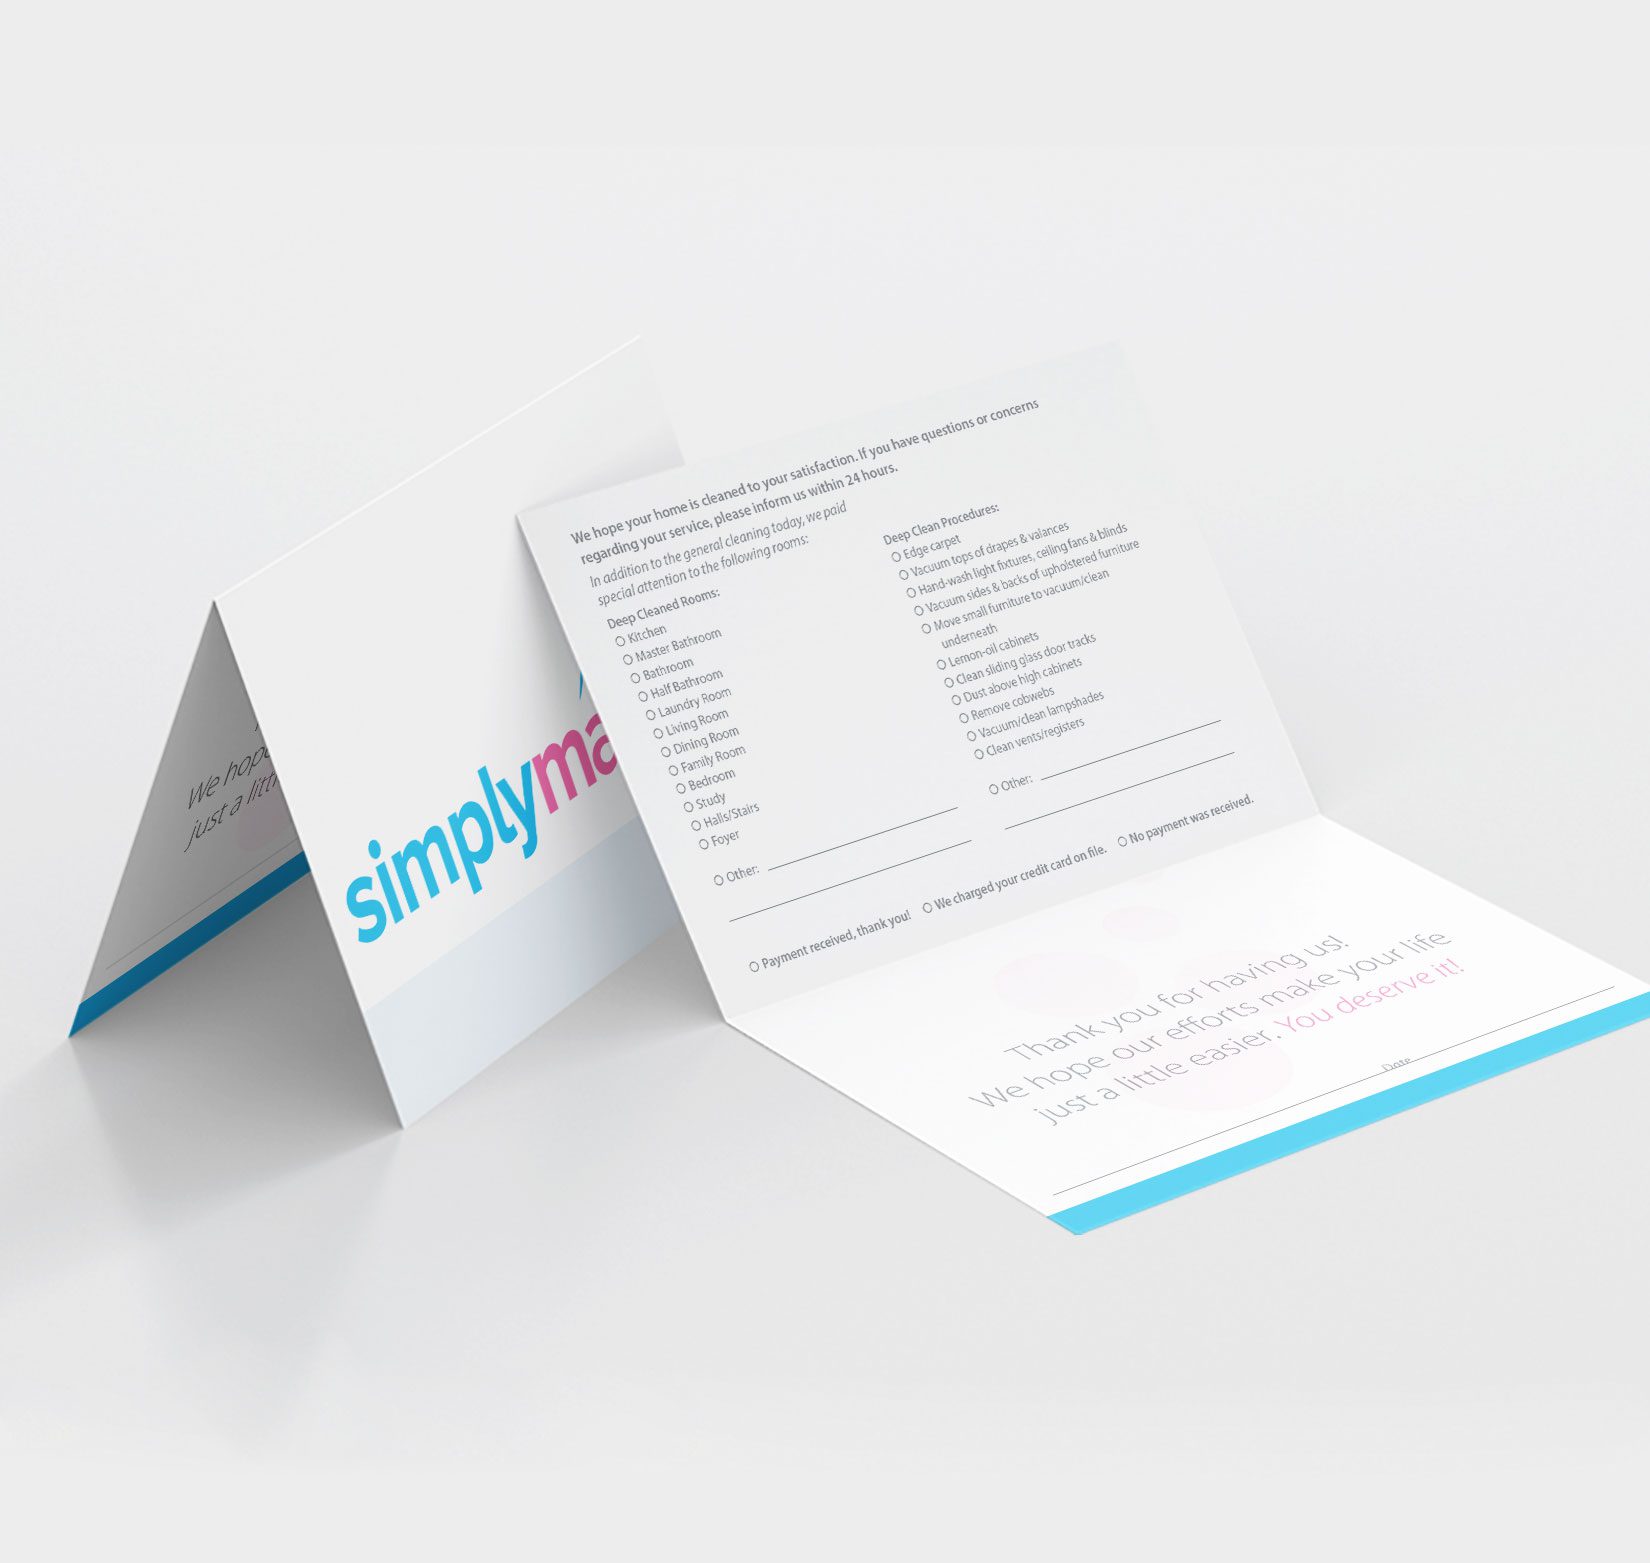 A thank you card against a white background for a company called SimplyMaid. Inside the card is a survey asking questions about the service.